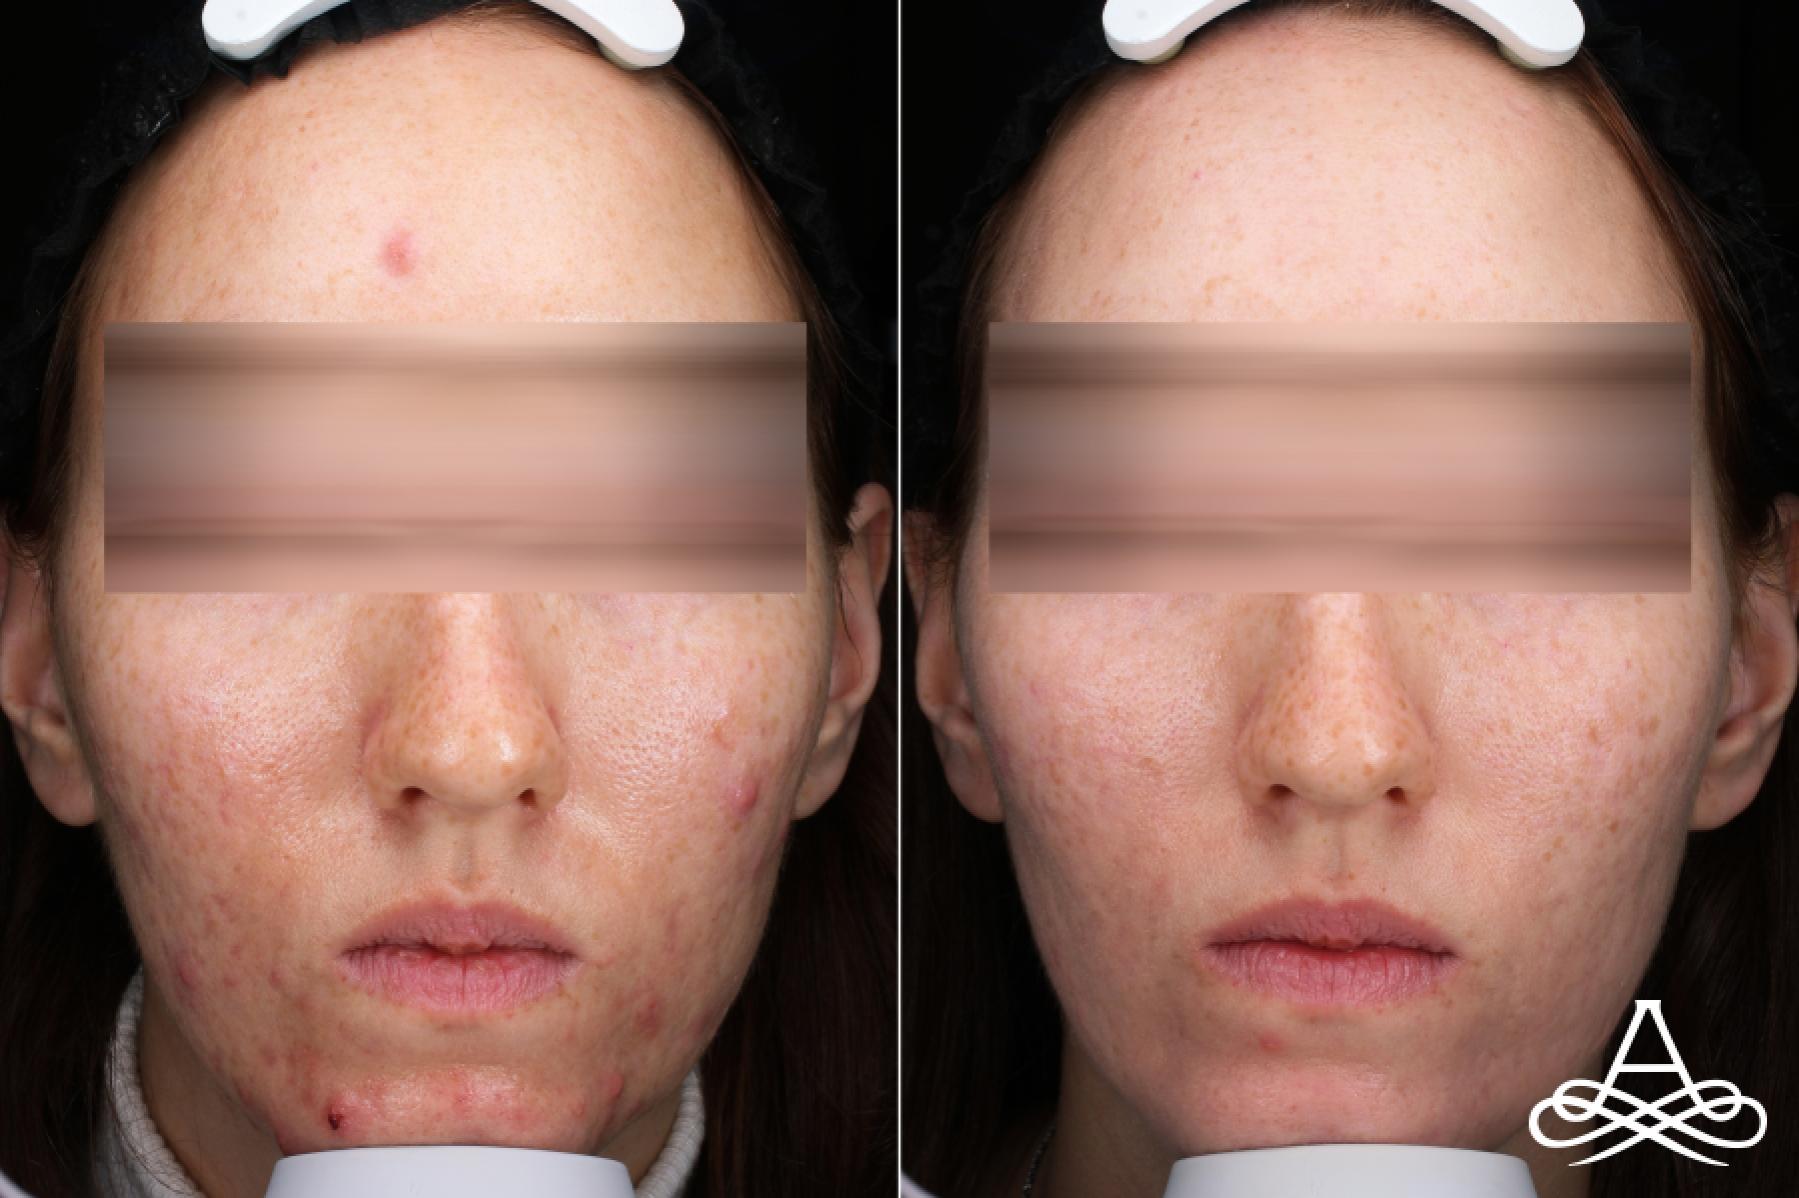 Acne Scars: Patient 8 - Before and After 1